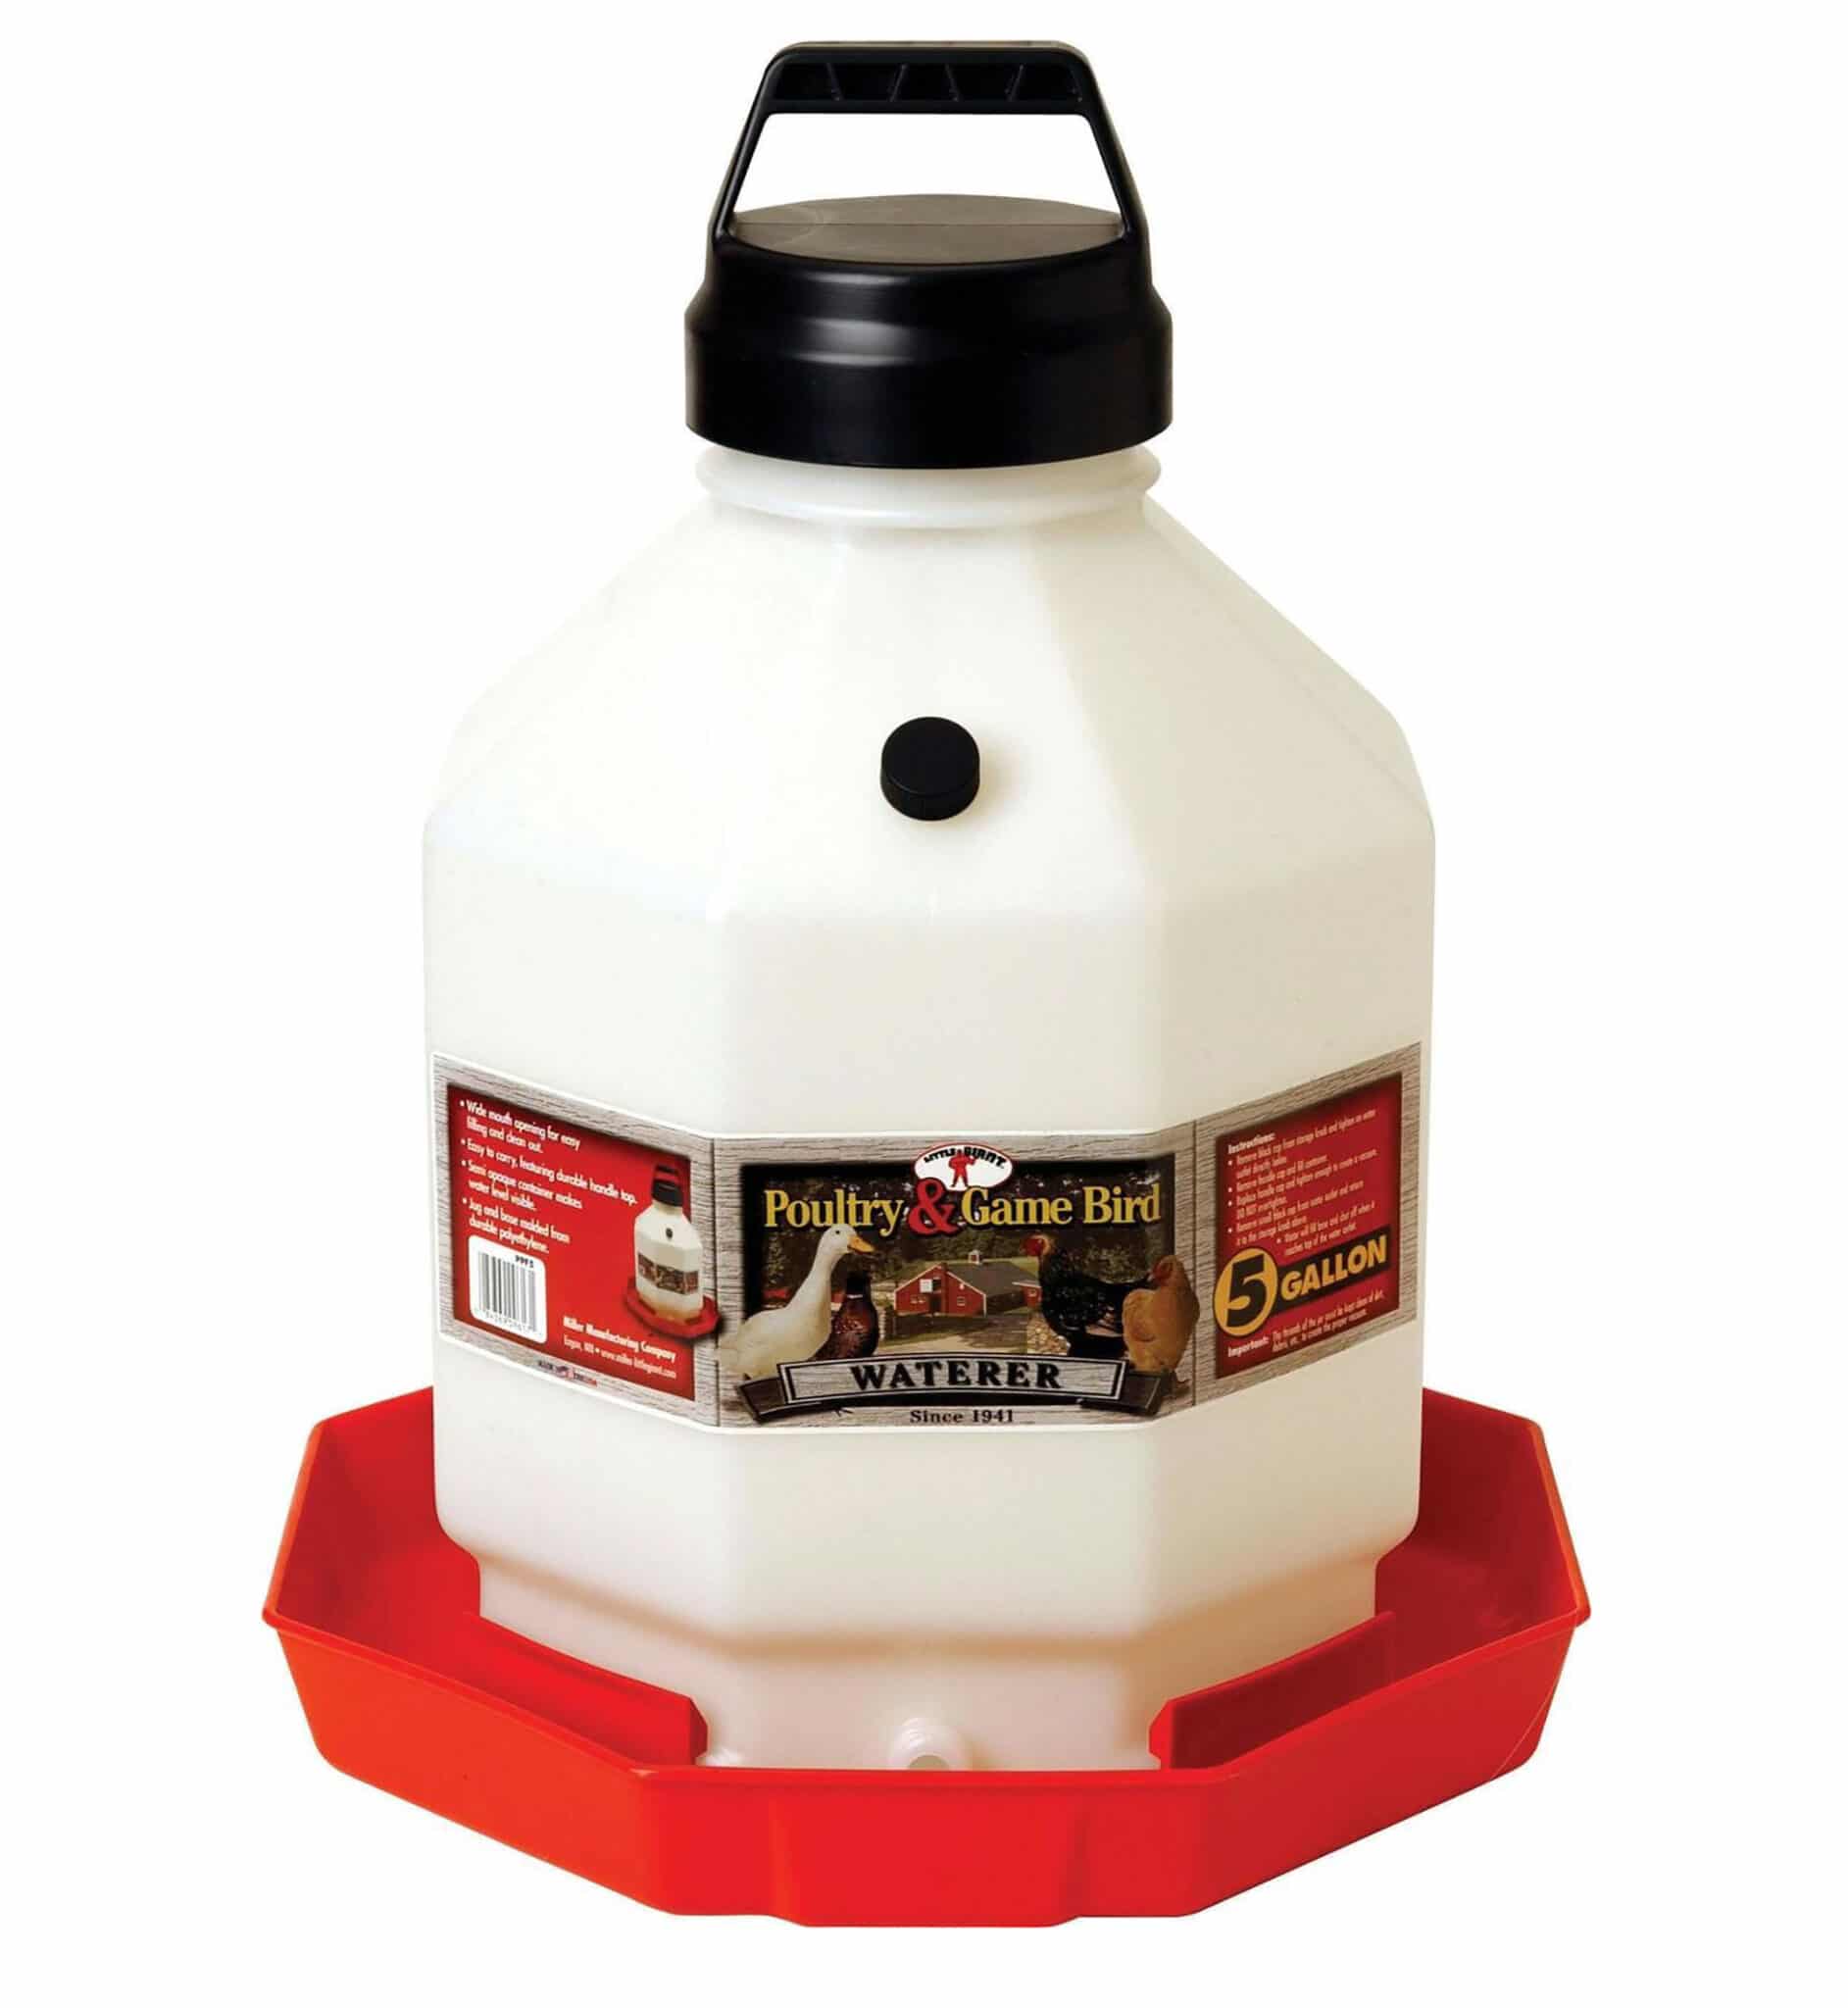 Automatic Chicken Waterer